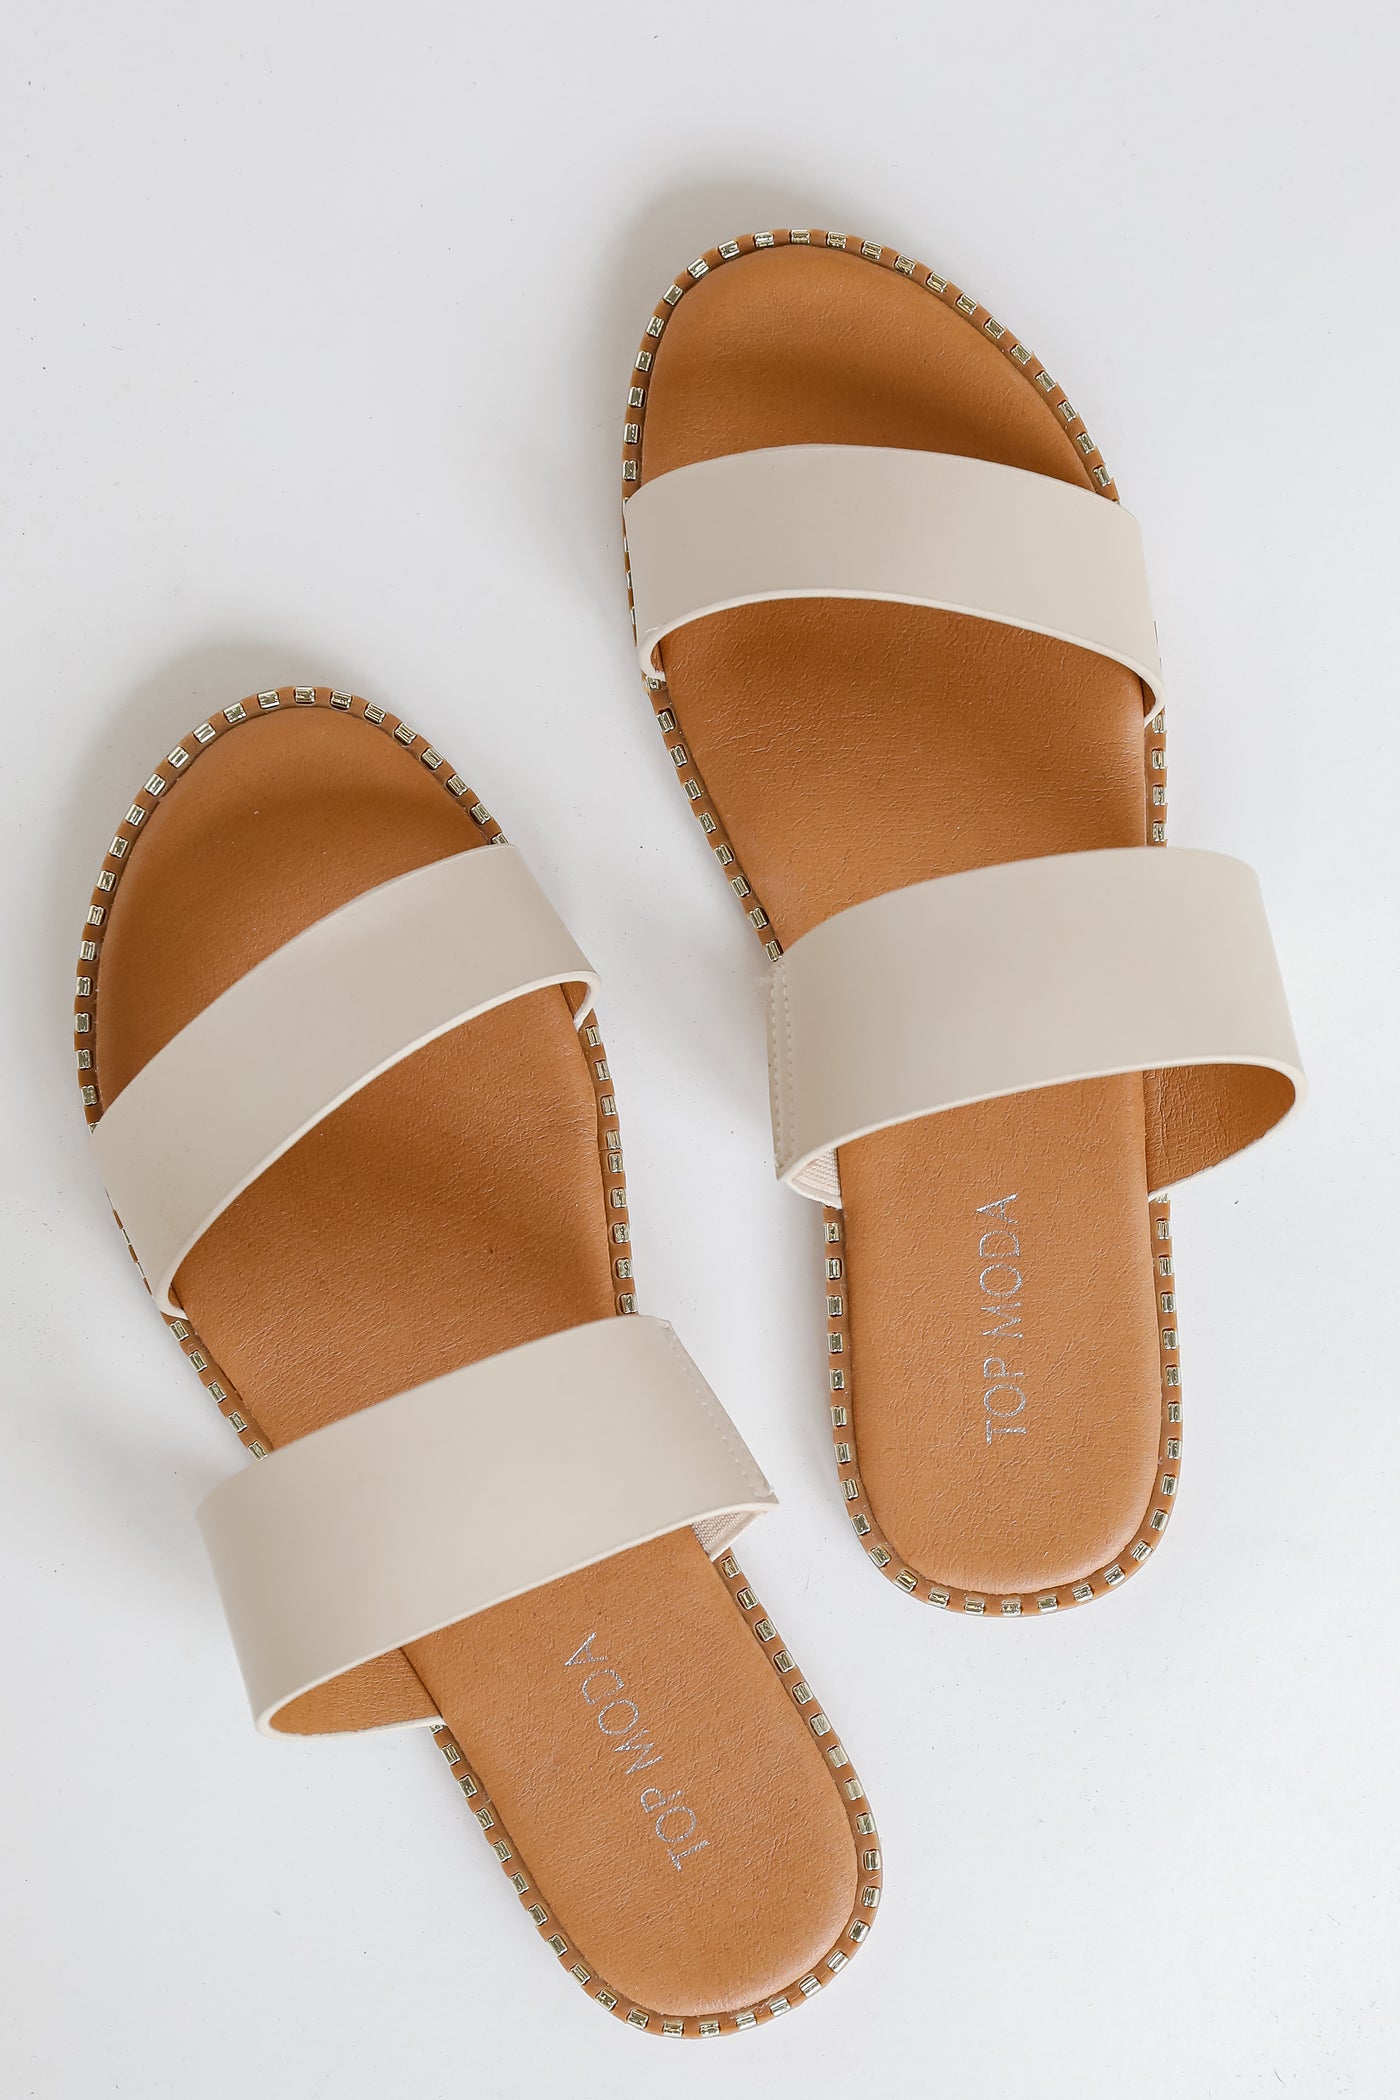 Double Strap Sandals in ivory